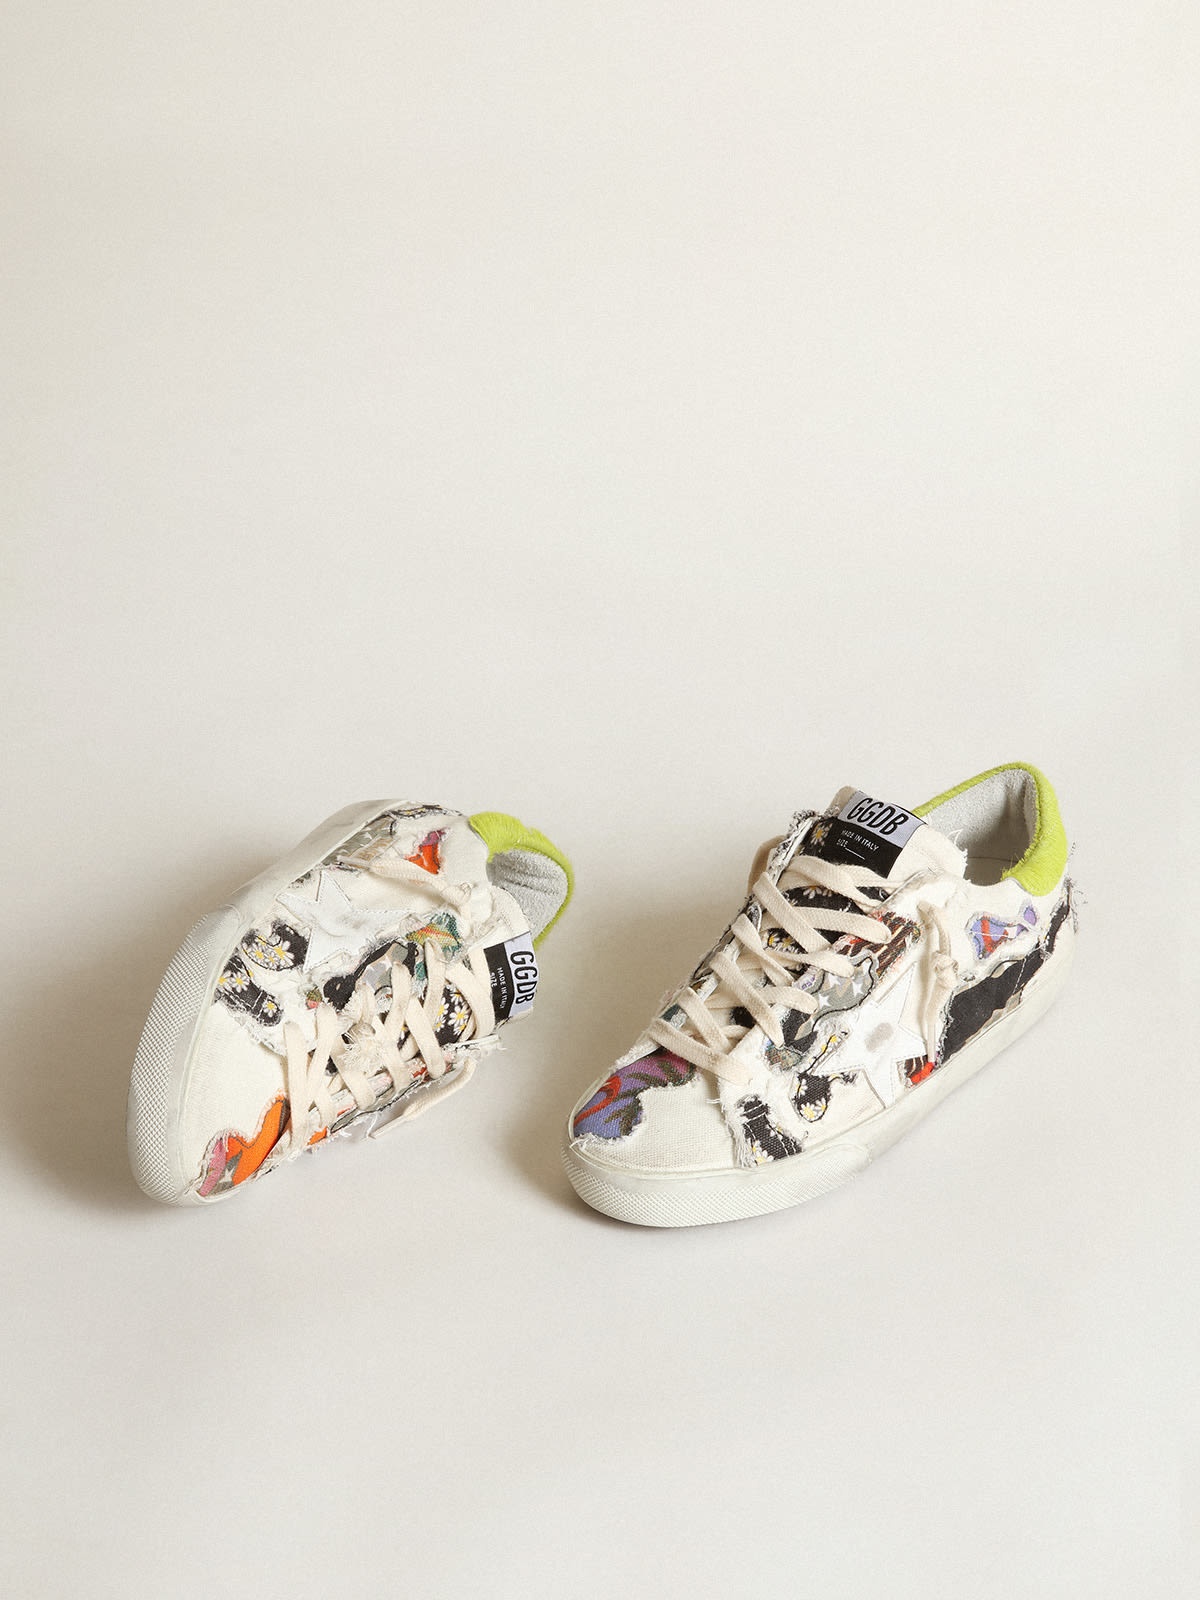 Women’s Super-Star LAB with multicolored prints and white leather star - 2